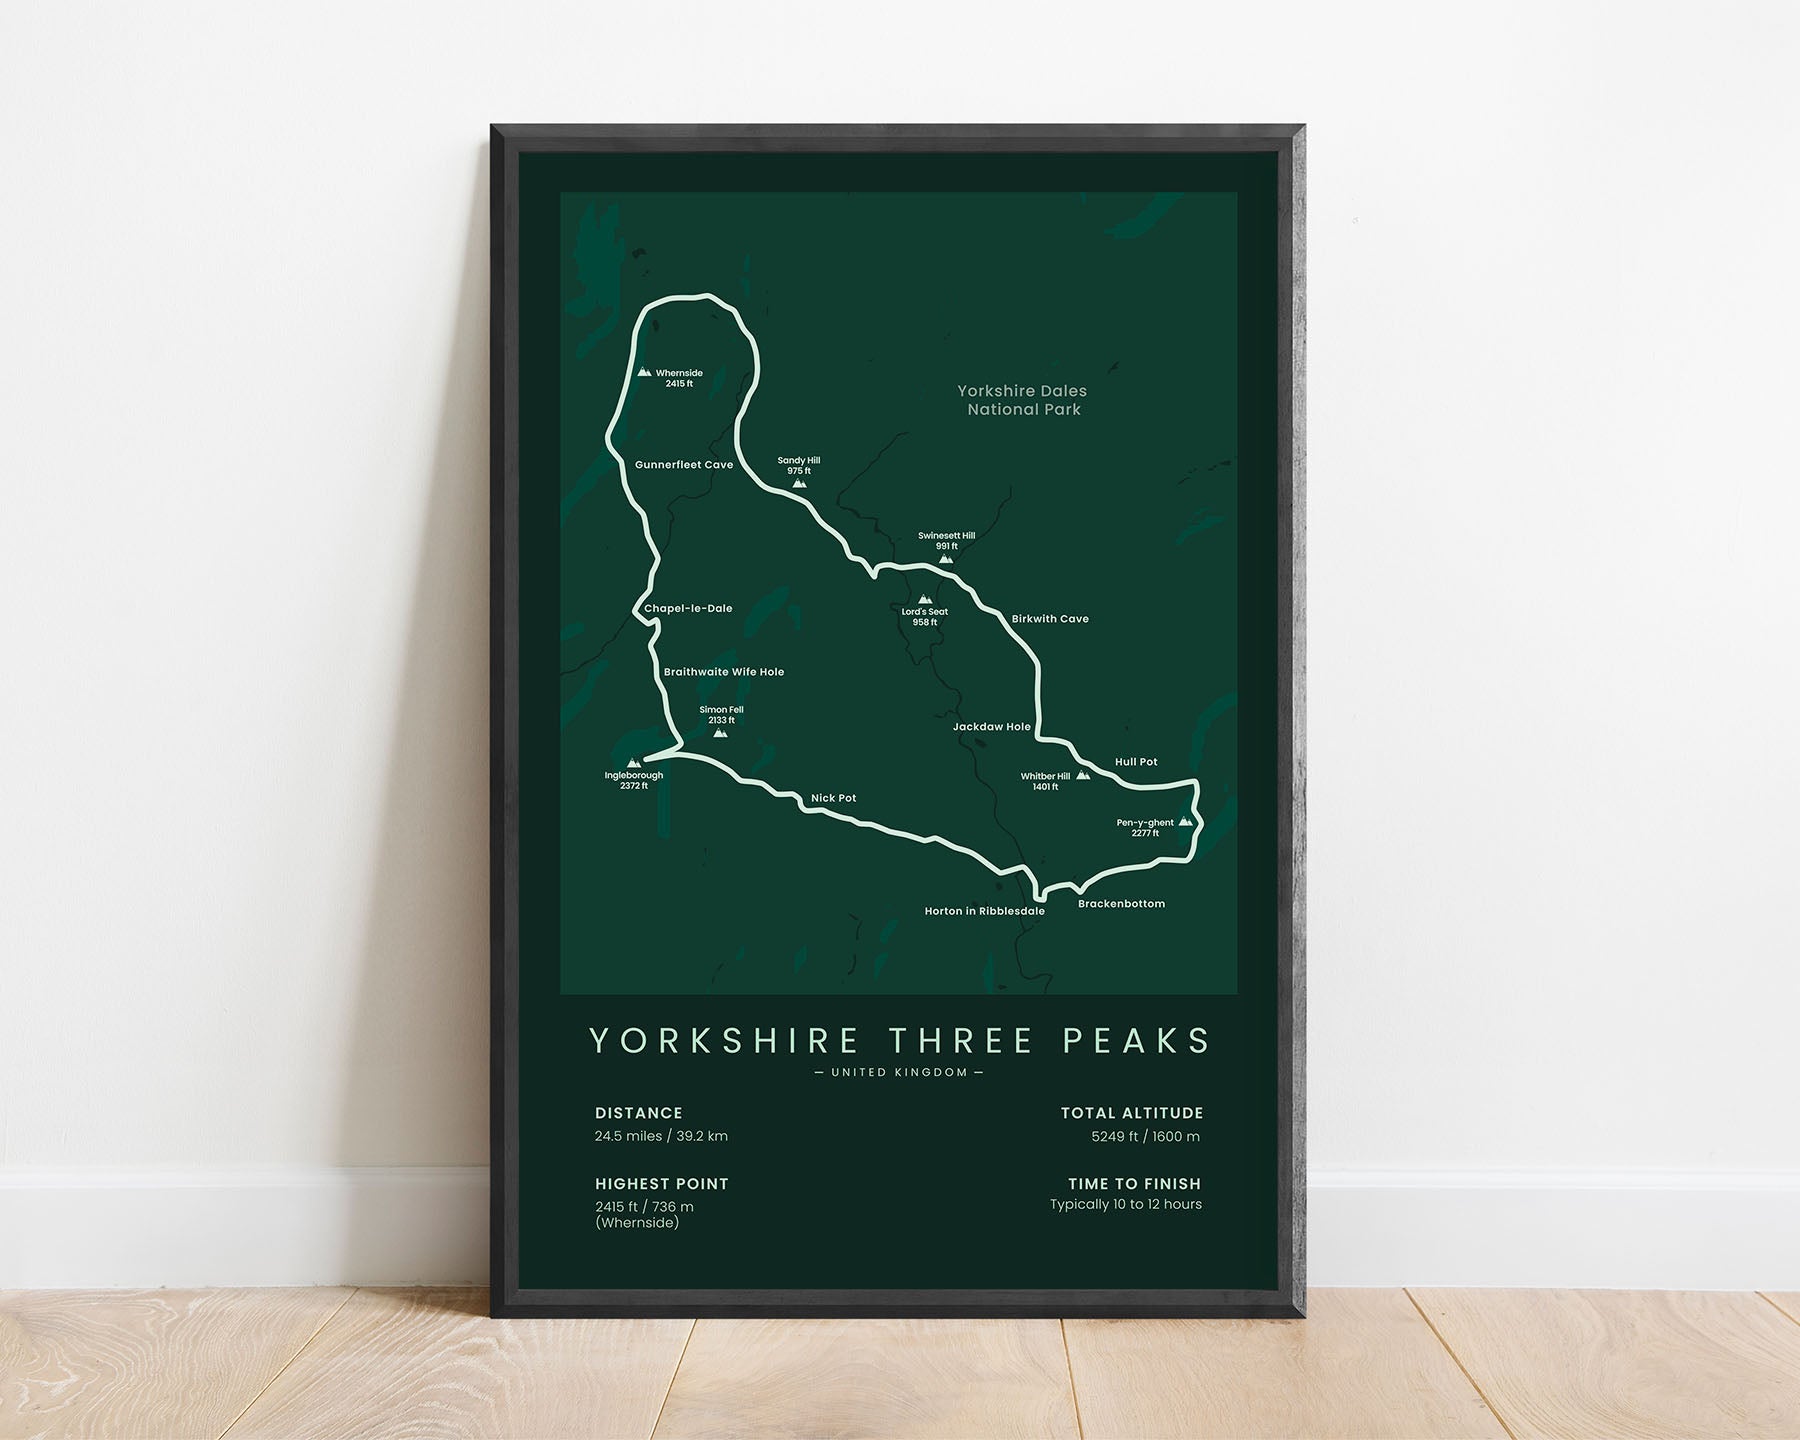 Yorkshire Three Peaks (Yorkshire Dales National Park) path print with green background